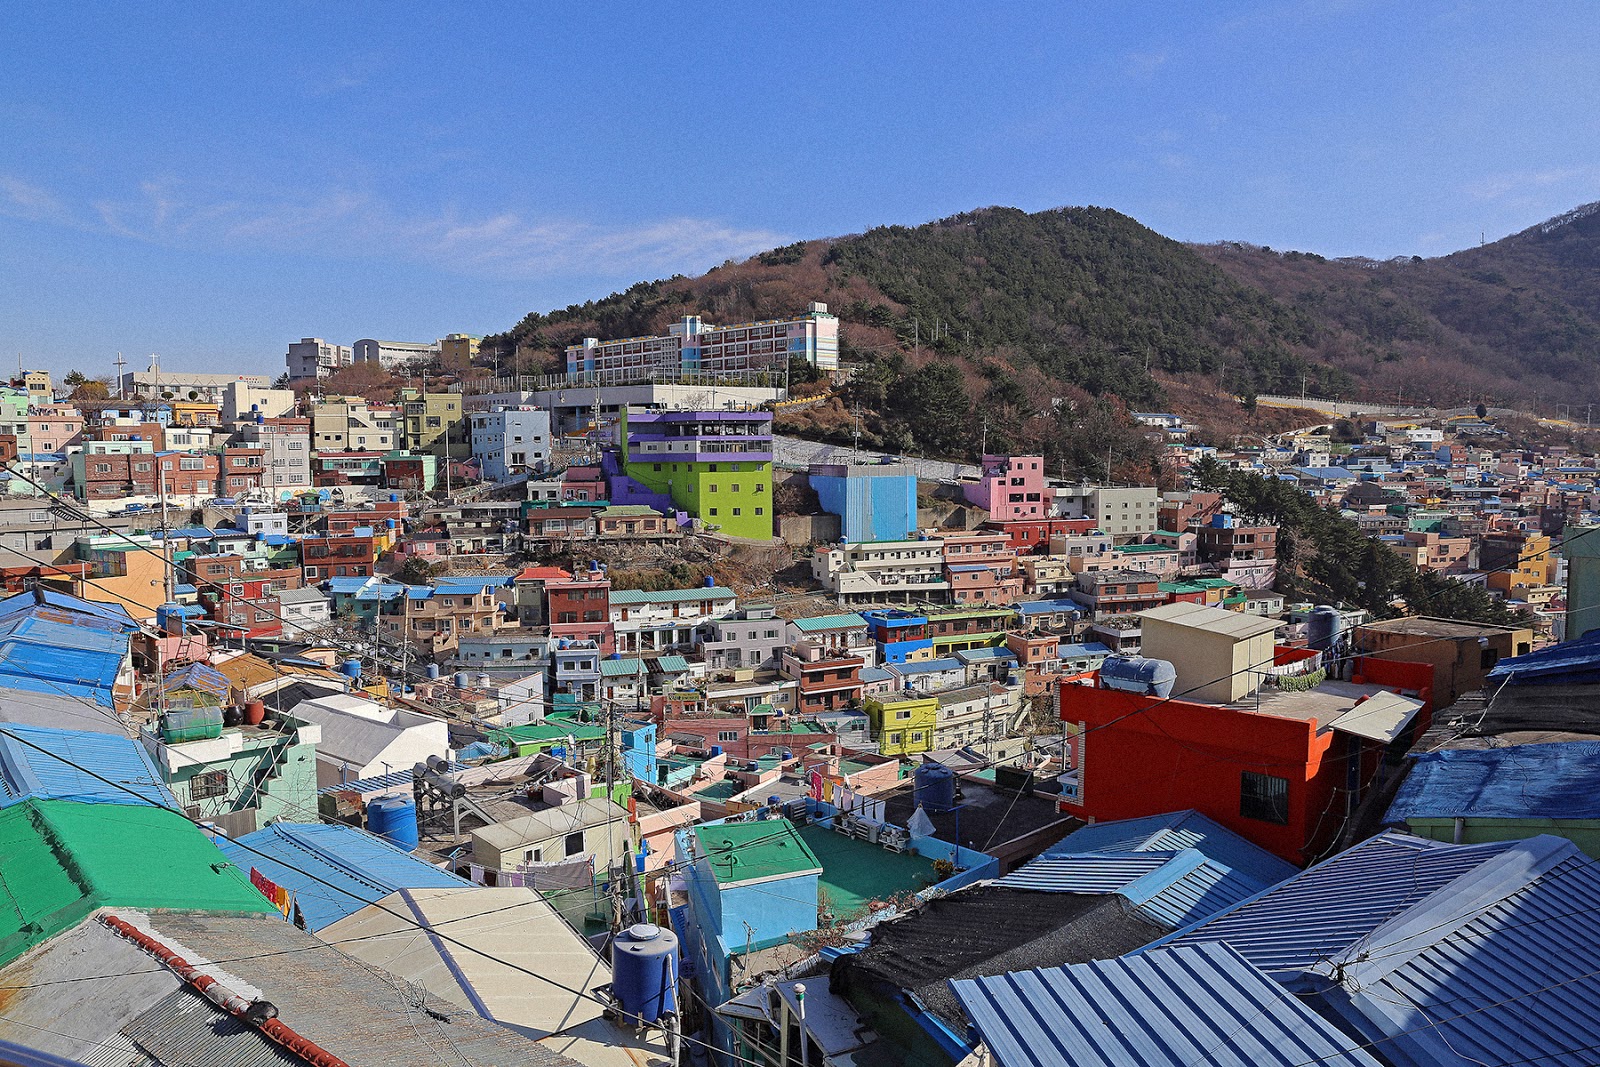 Beyond the sea: What to See in Winter in Busan, South Korea by Posh, Broke, & Bored